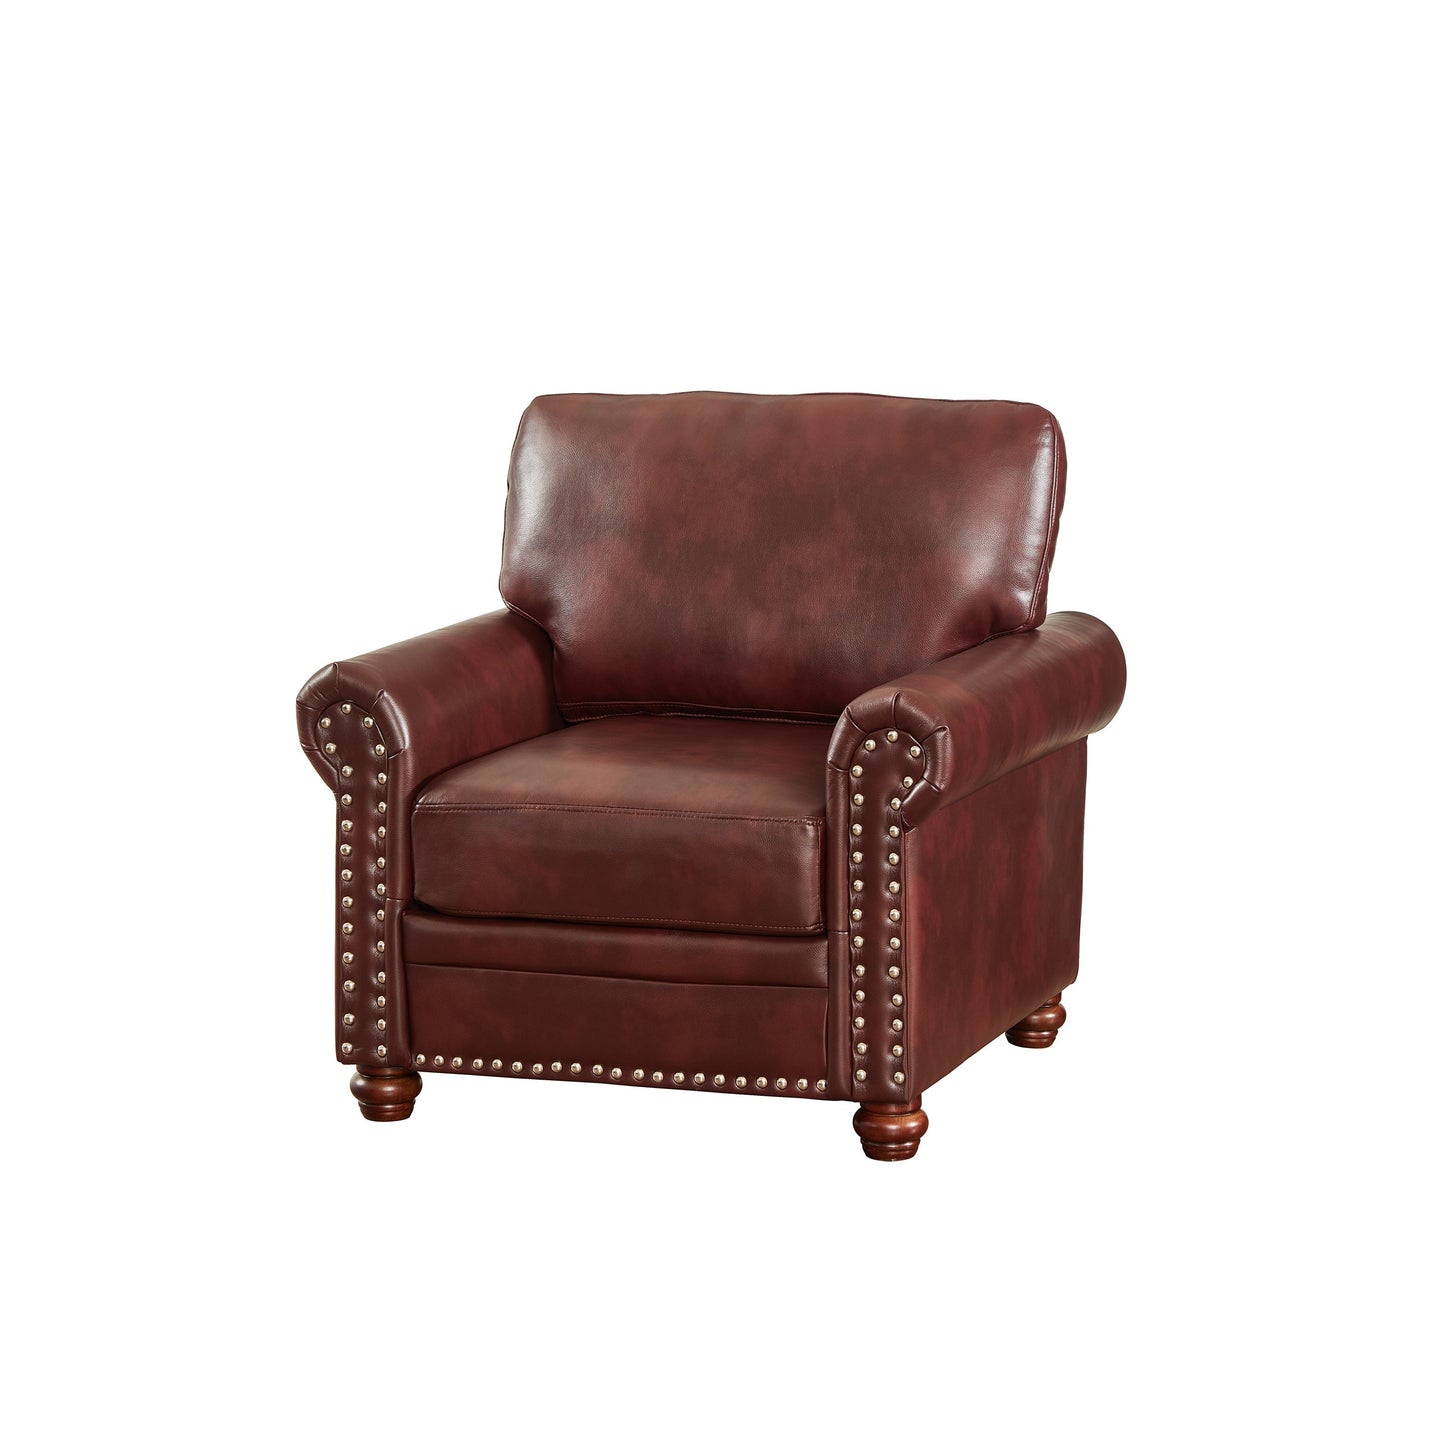 Living Room Sofa Single Seat Chair with Wood Leg Burgundy Faux Leather